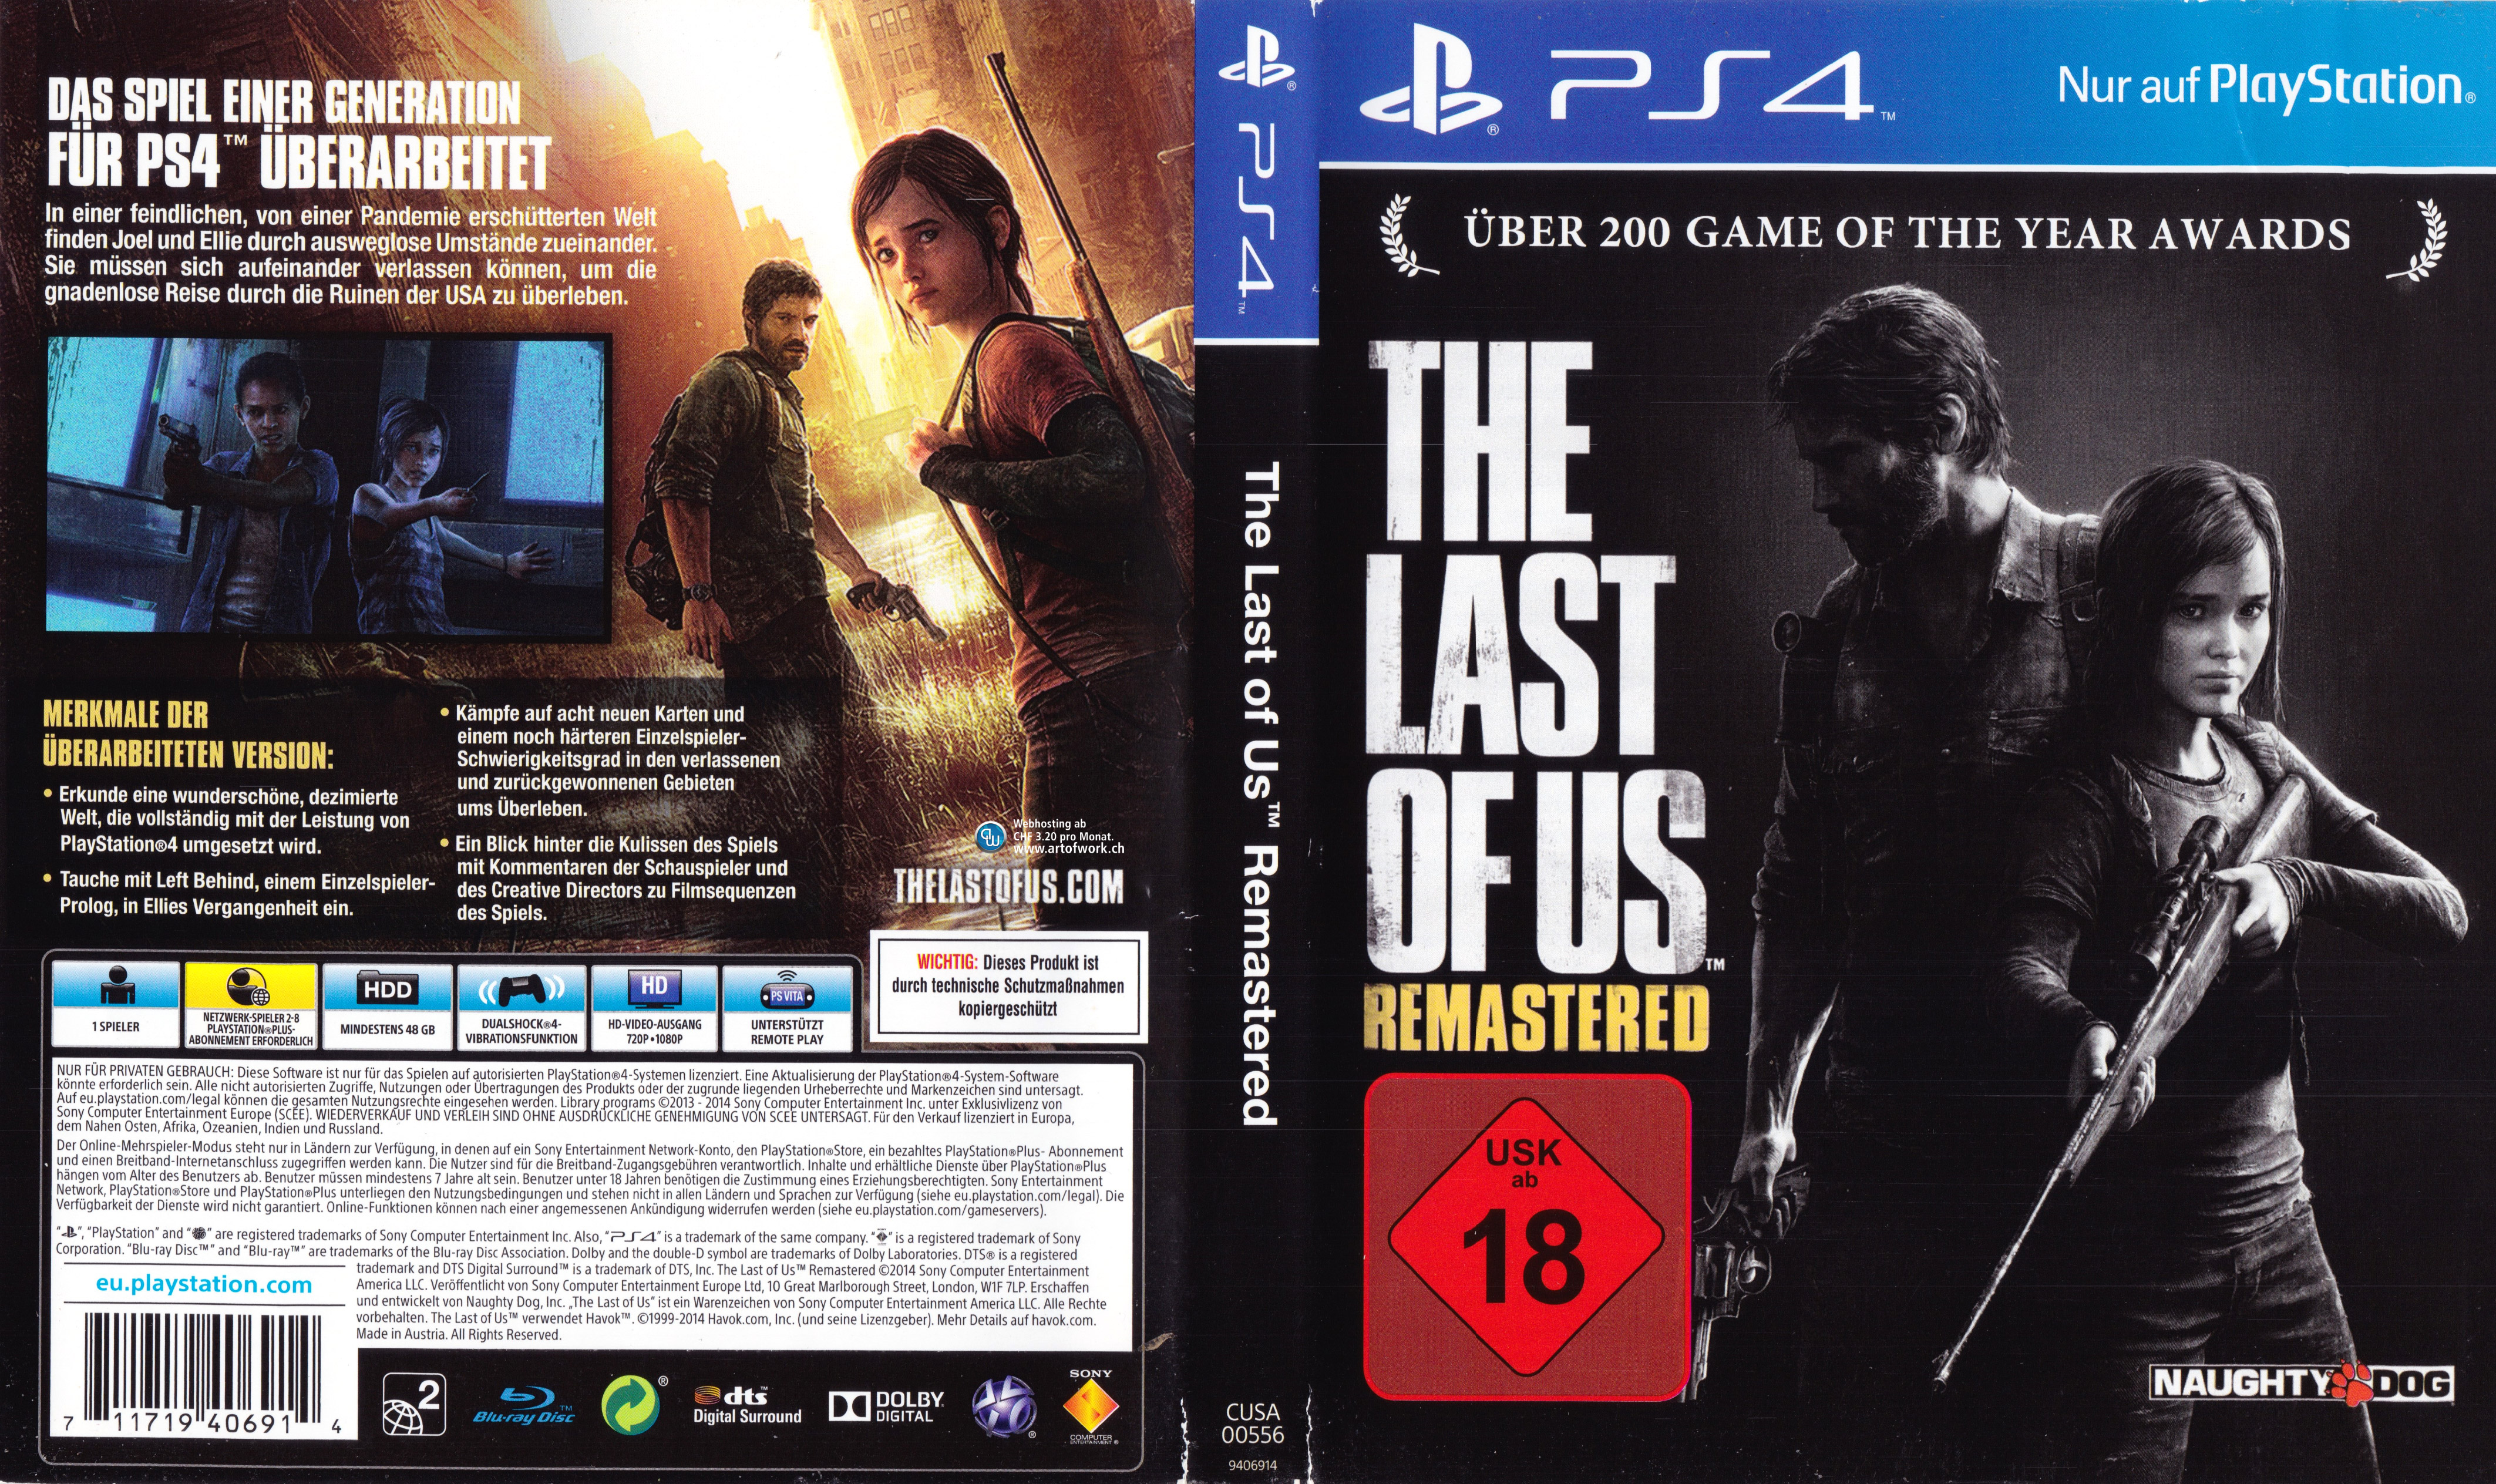 The Last Of Us Remastered V2 Playstation 4 Covers Cover Century